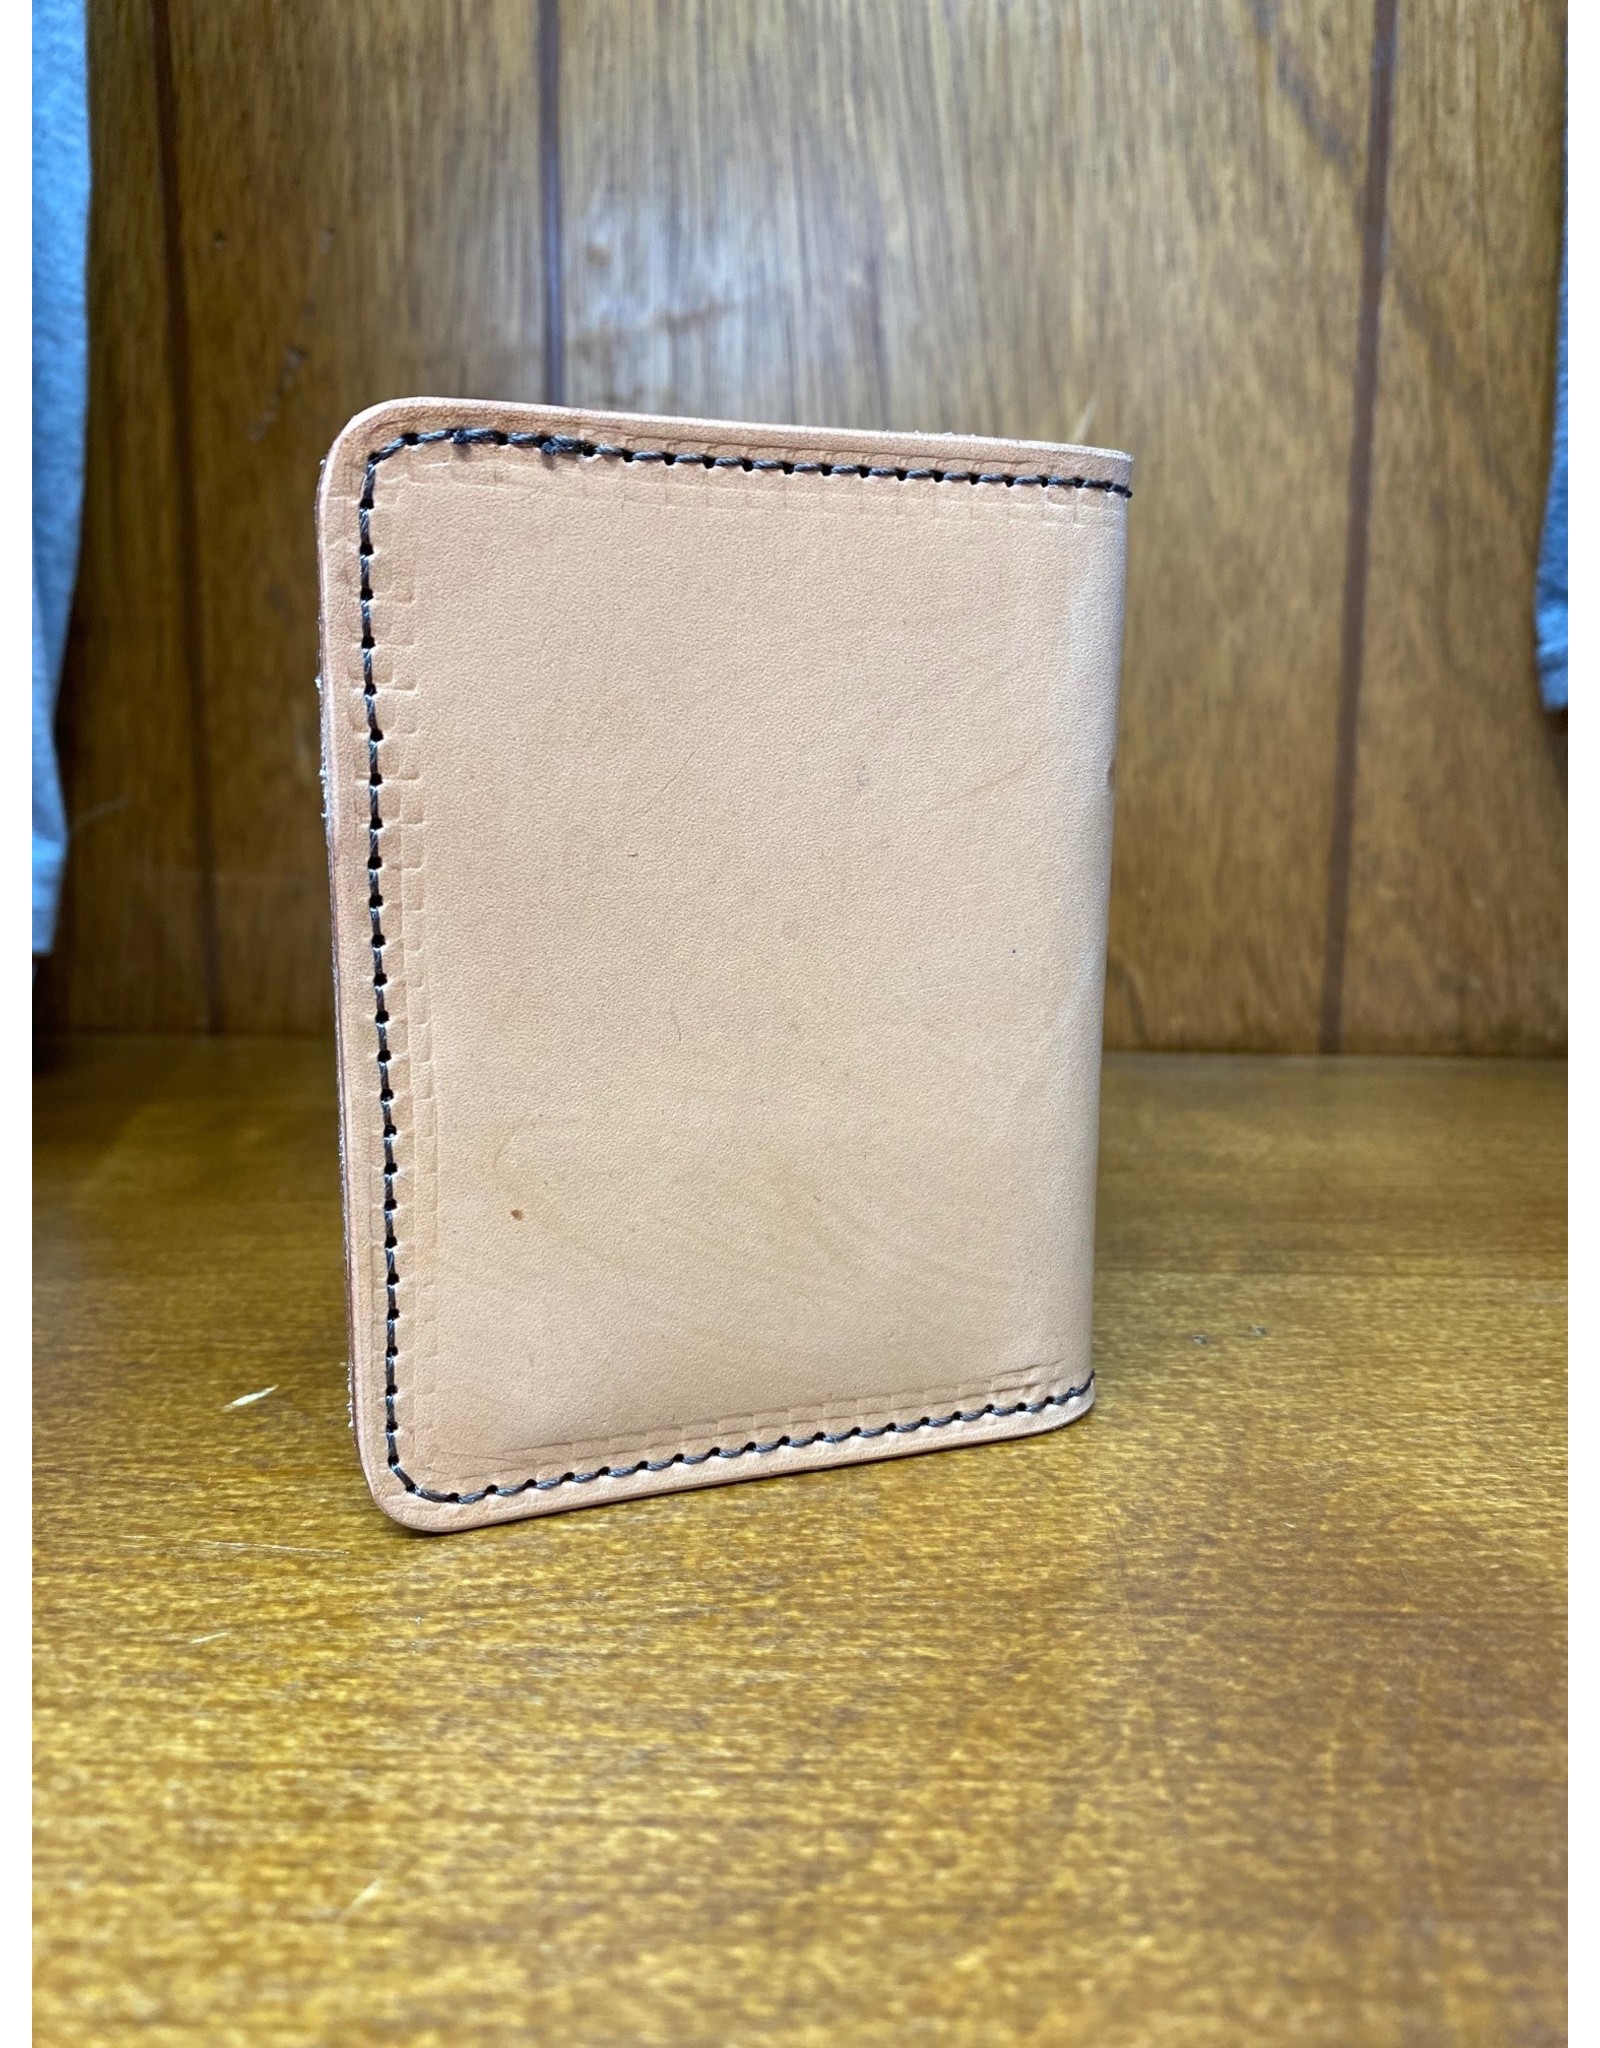 Chase Combs Leather Smooth Tan Branded Leather Bifold Wallet